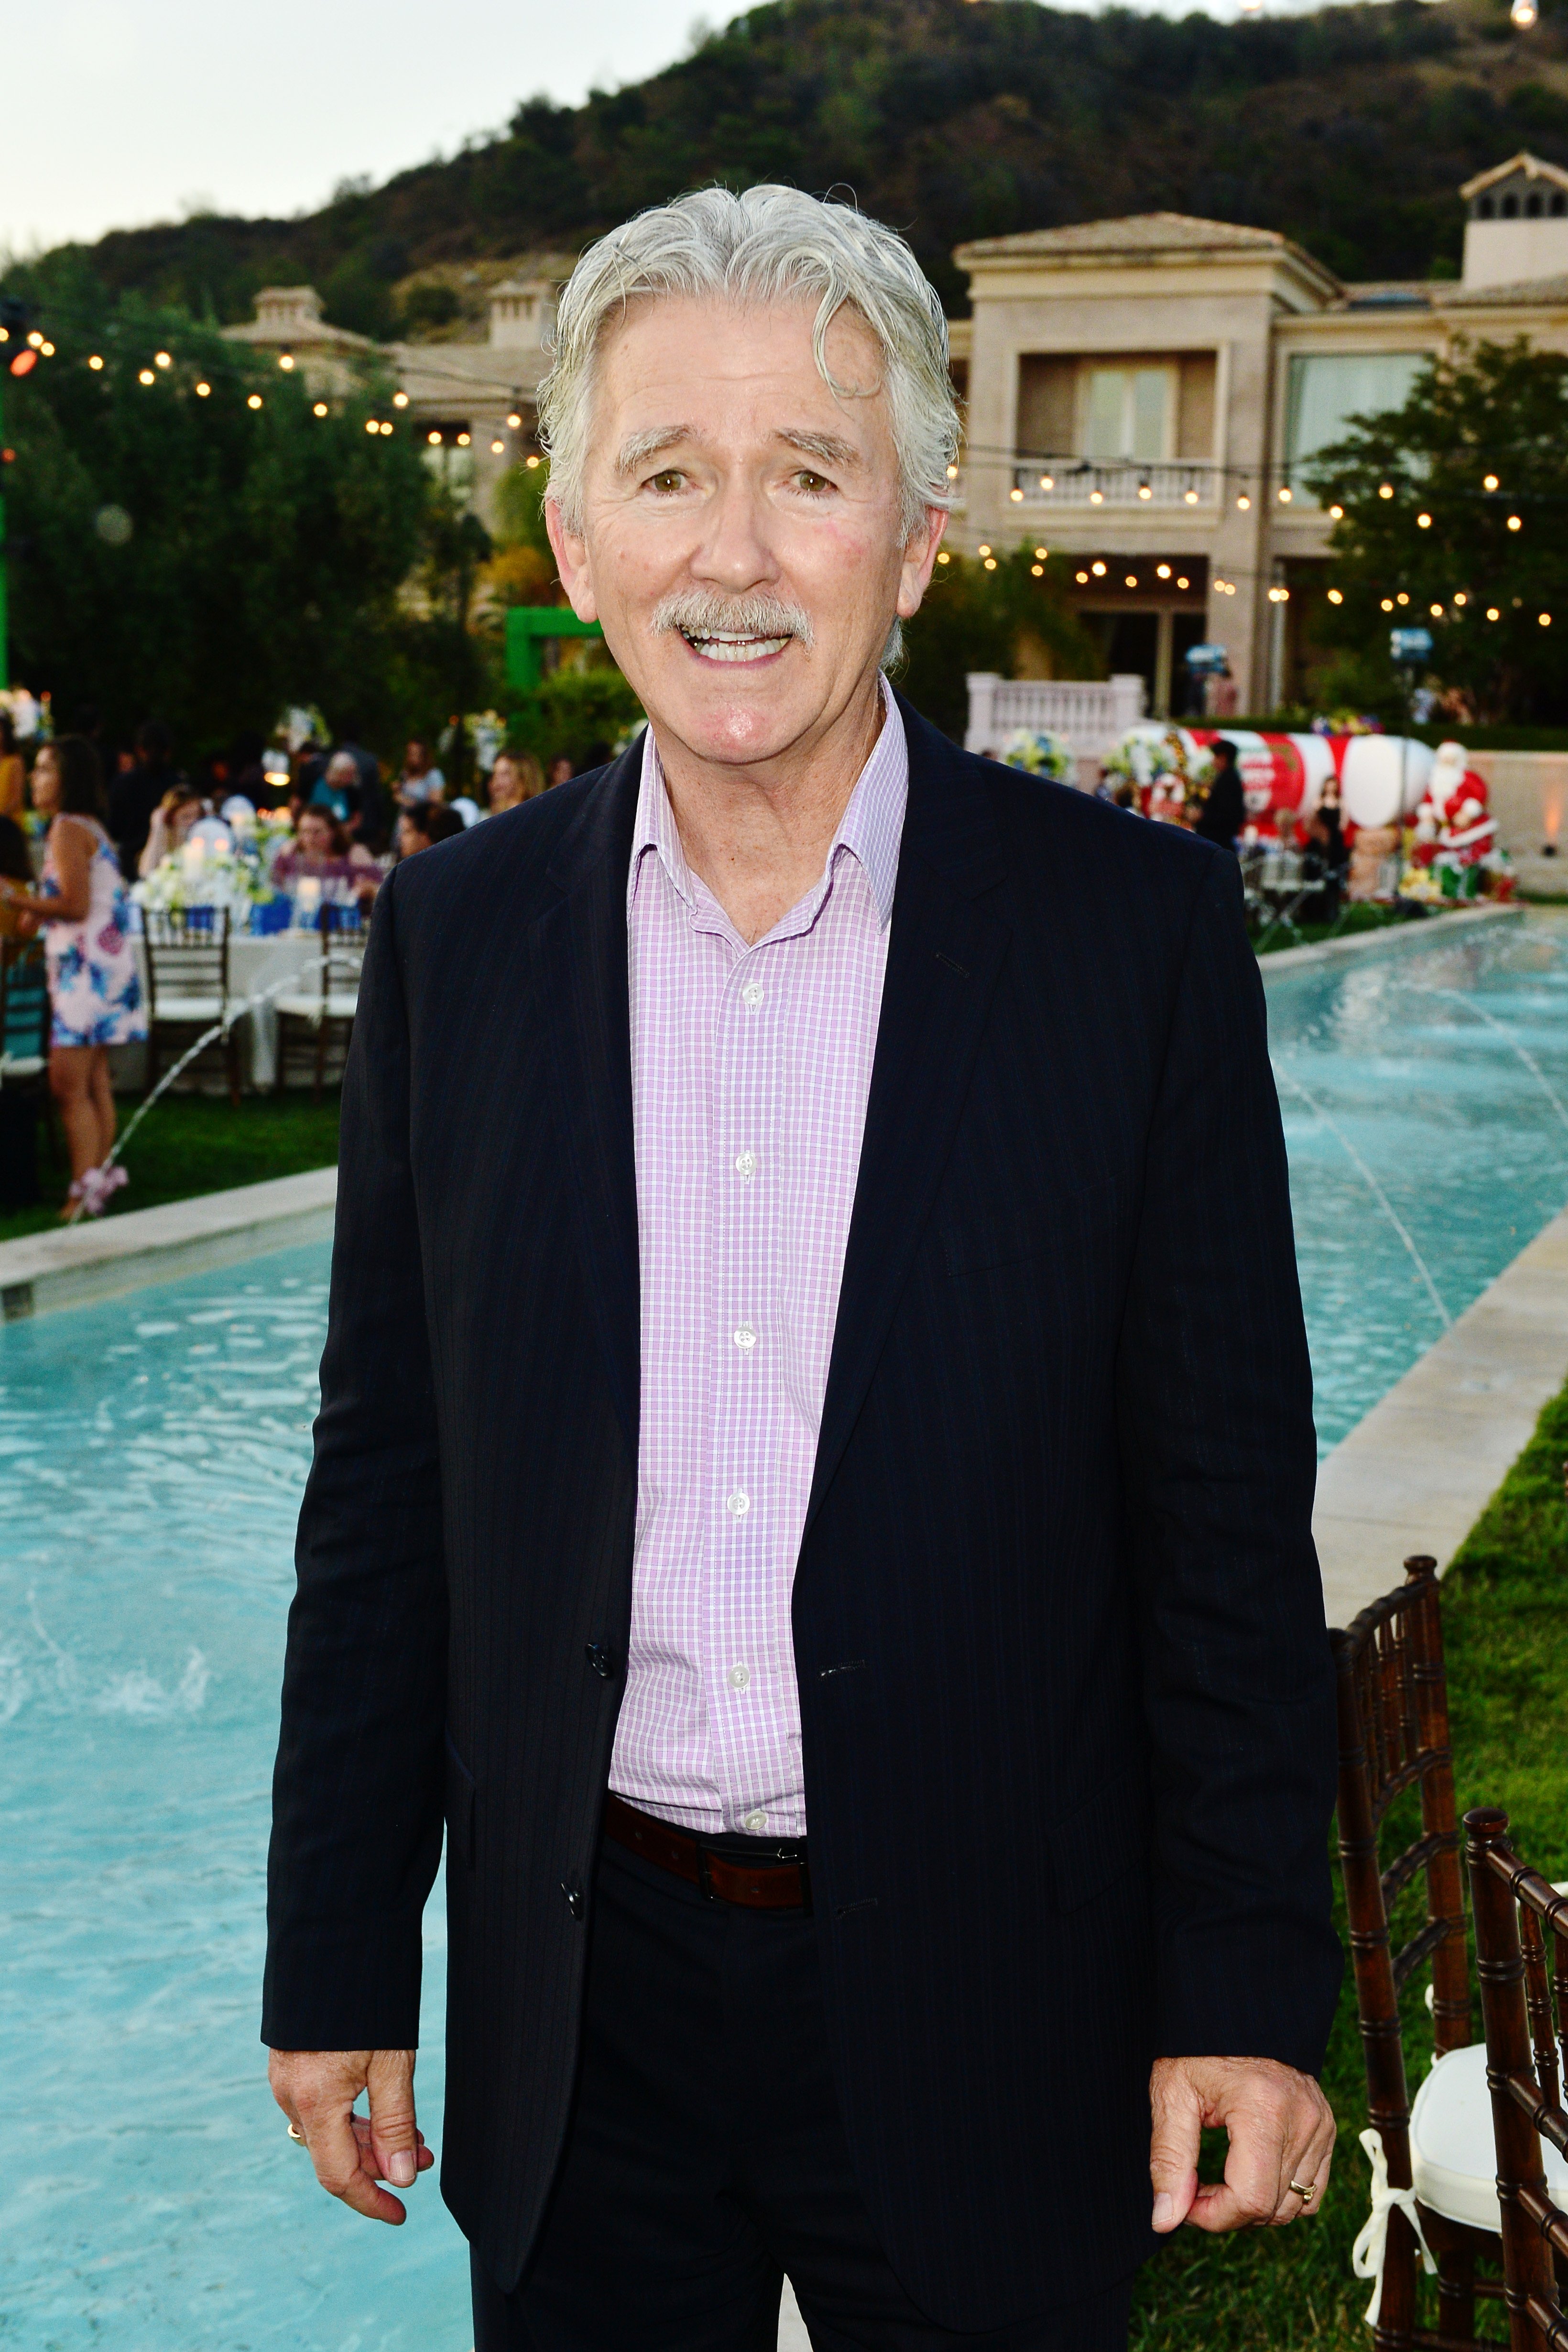 Patrick Duffy attends Hallmark Channel and Hallmark Movies & Mysteries Summer 2019 TCA Press Tour Event - Cocktail Reception at a Private Residence on July 26, 2019 in Beverly Hills, California.  |  Source: Getty Images